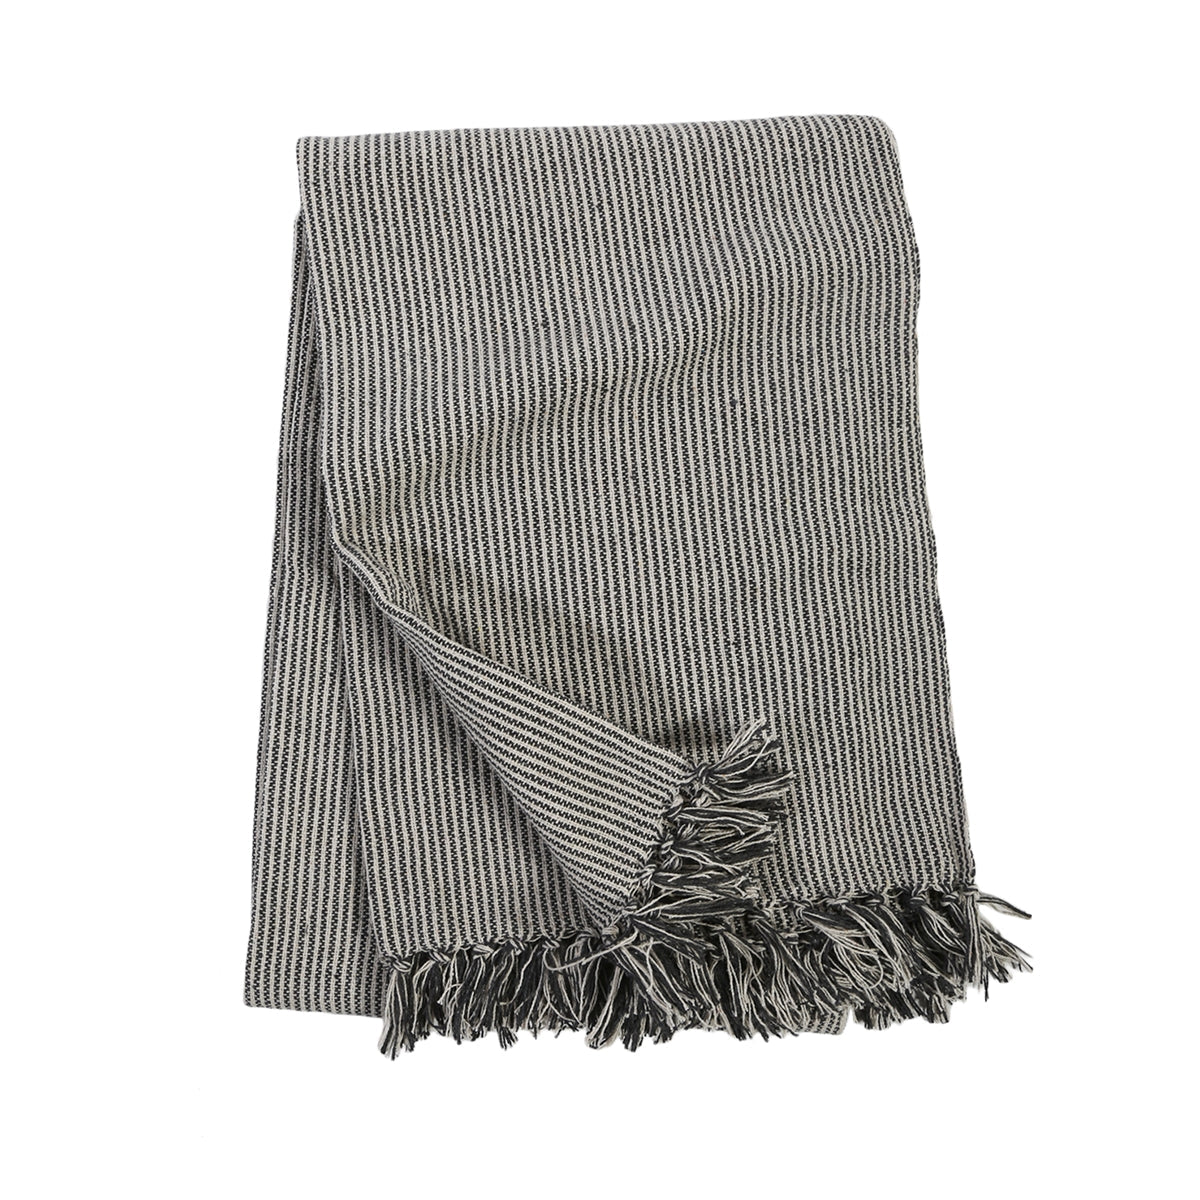 James Oversized Throw, Ivory and Charcoal